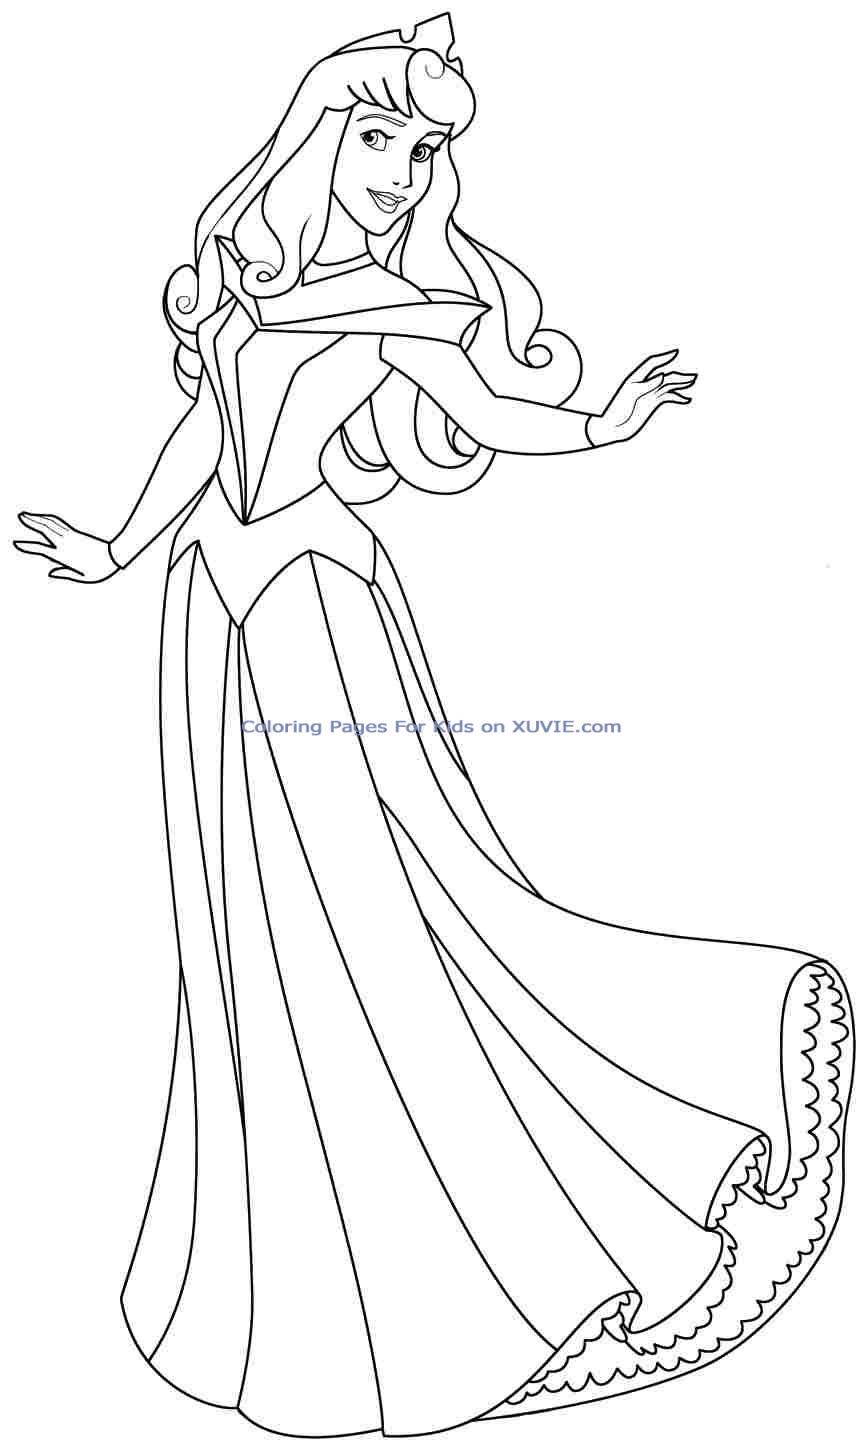 Aurora coloring pages to download and print for free